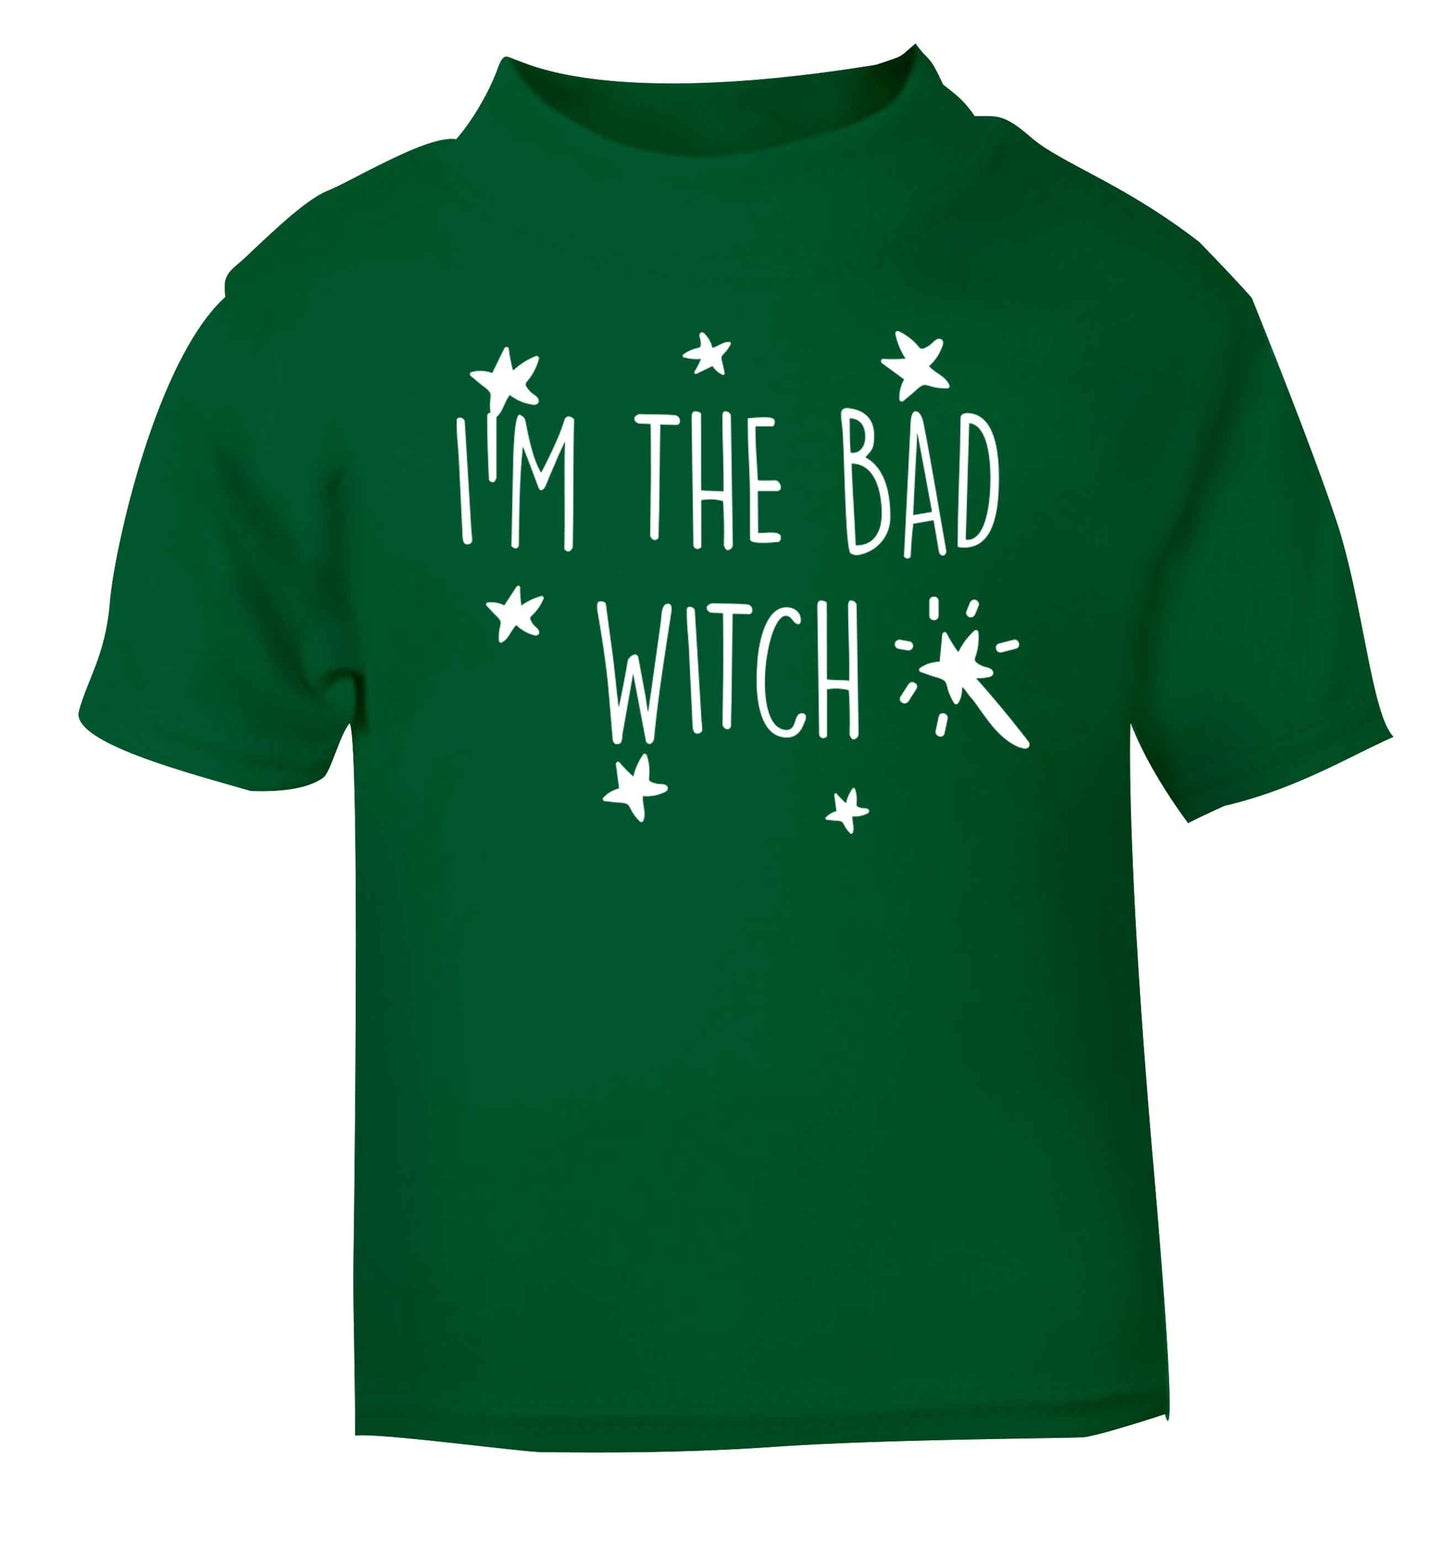 Bad witch green baby toddler Tshirt 2 Years